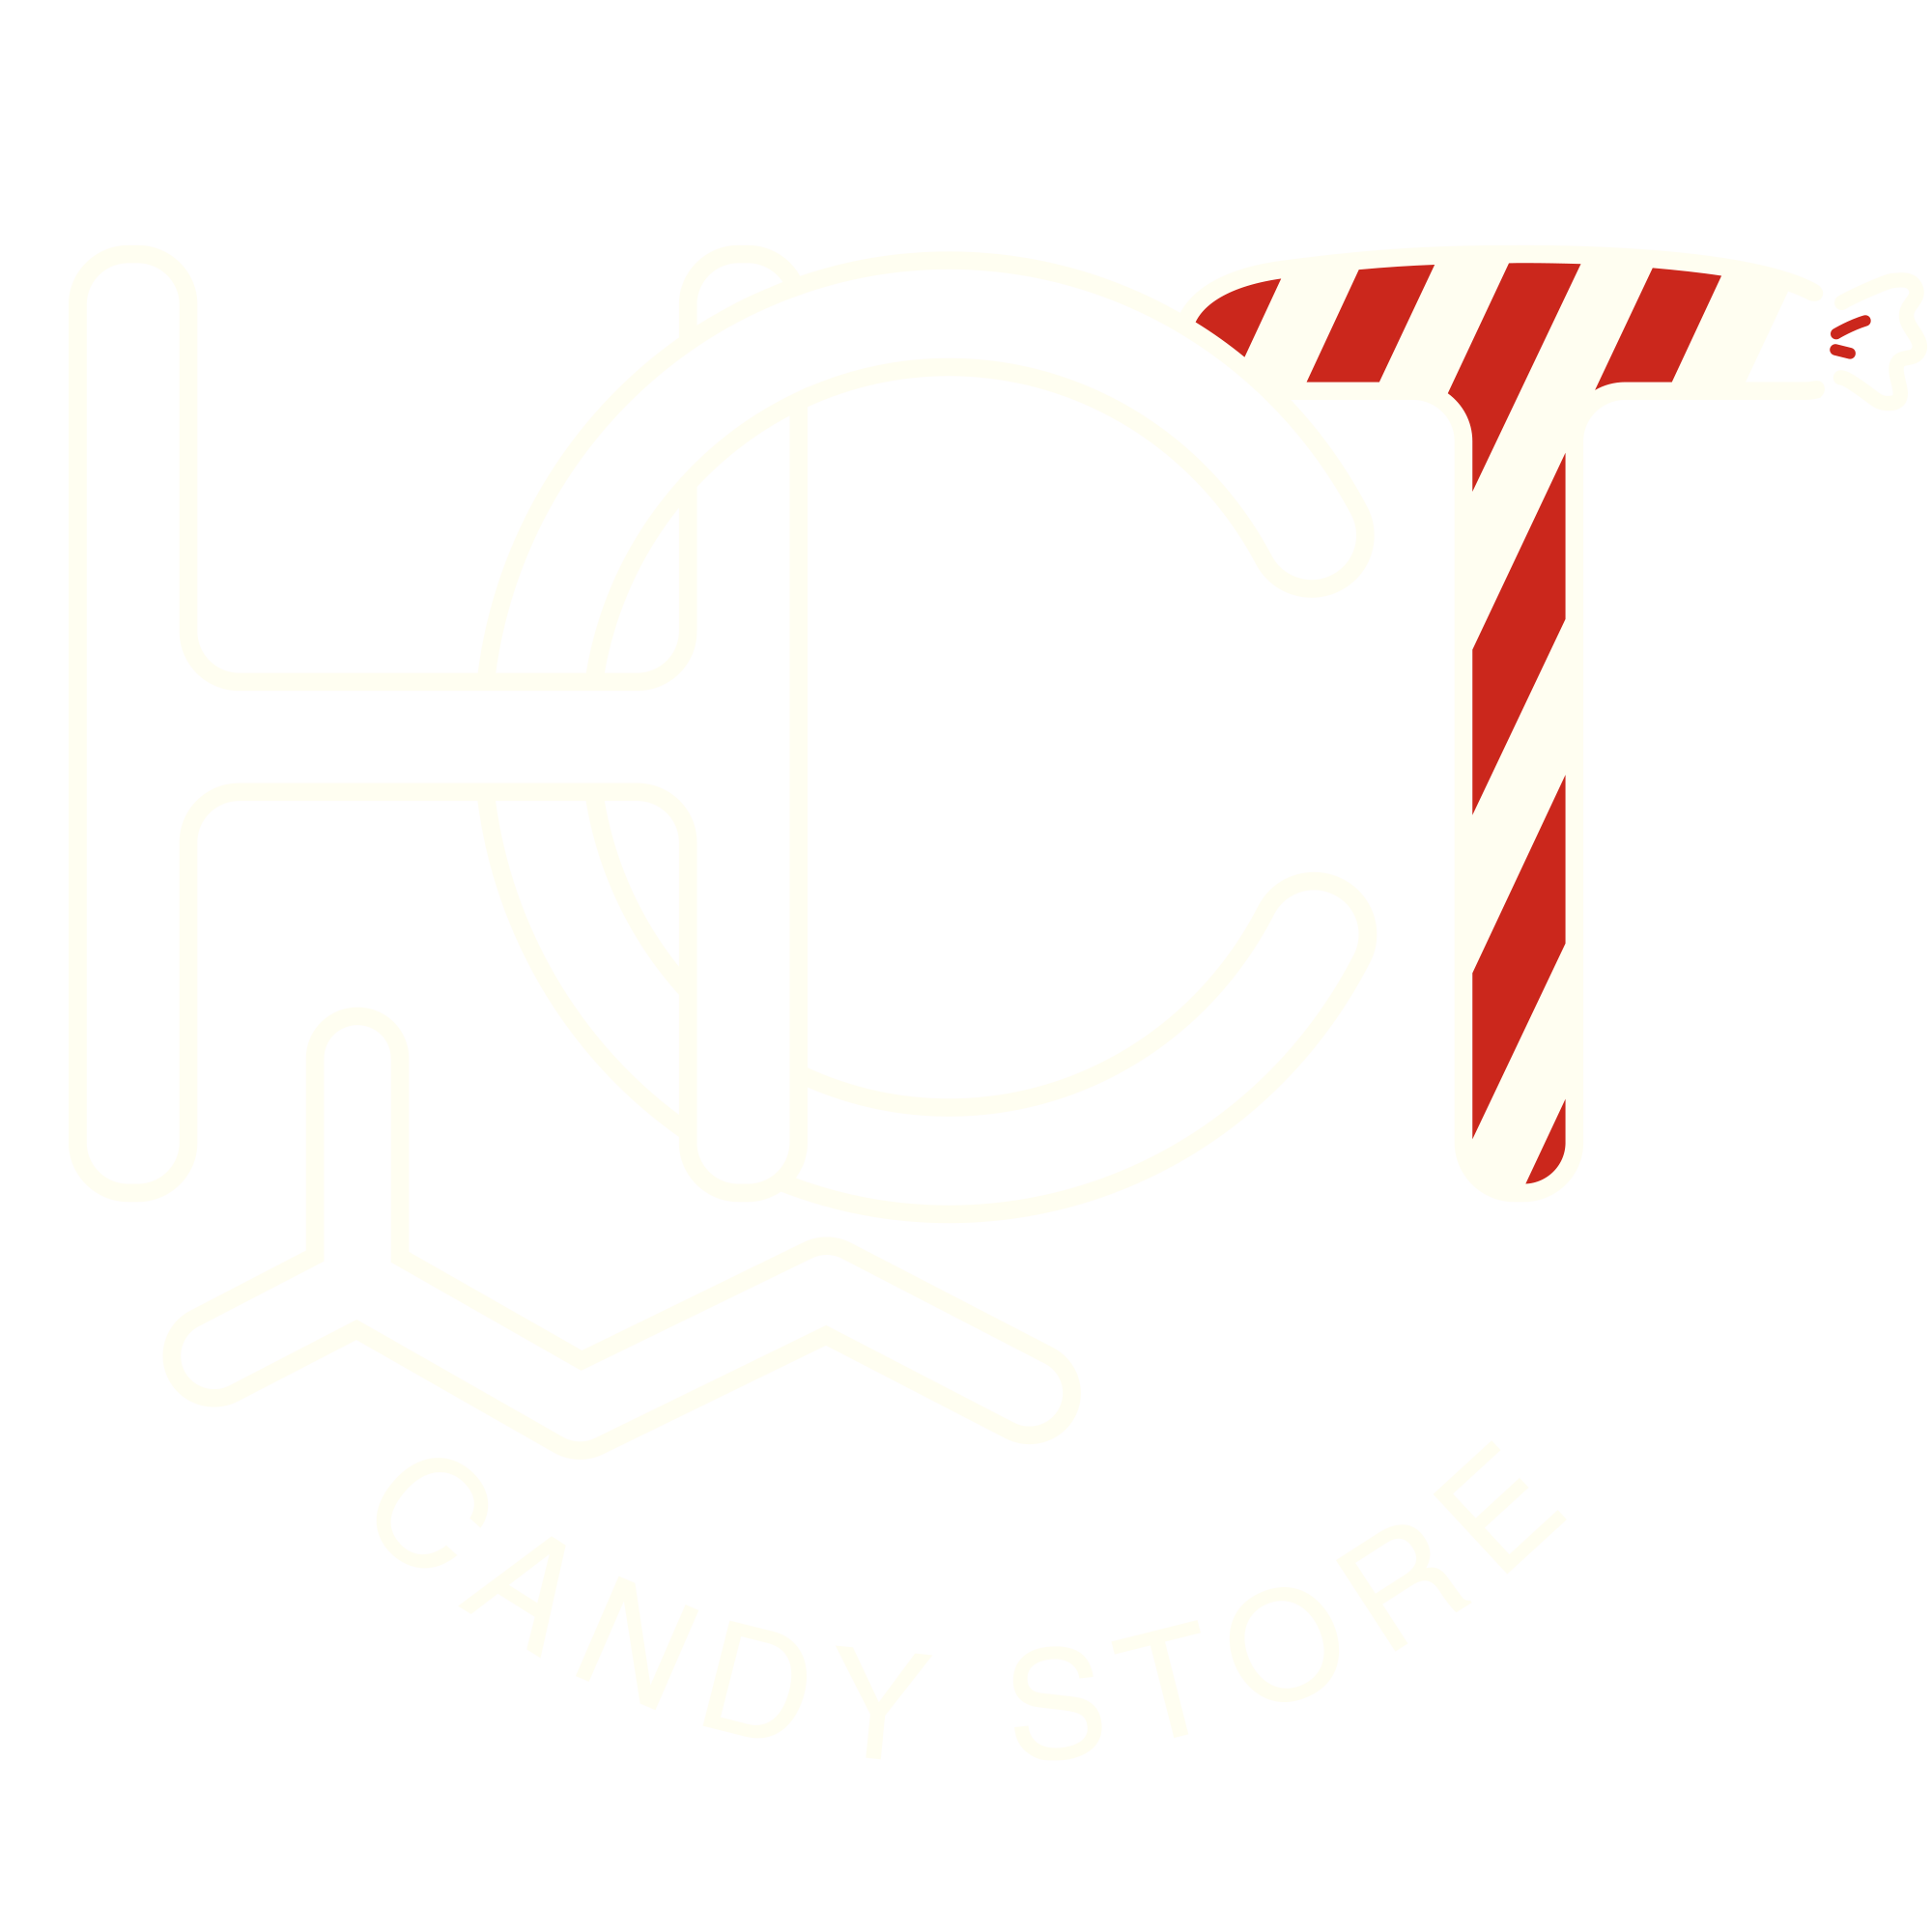 HCT candystore